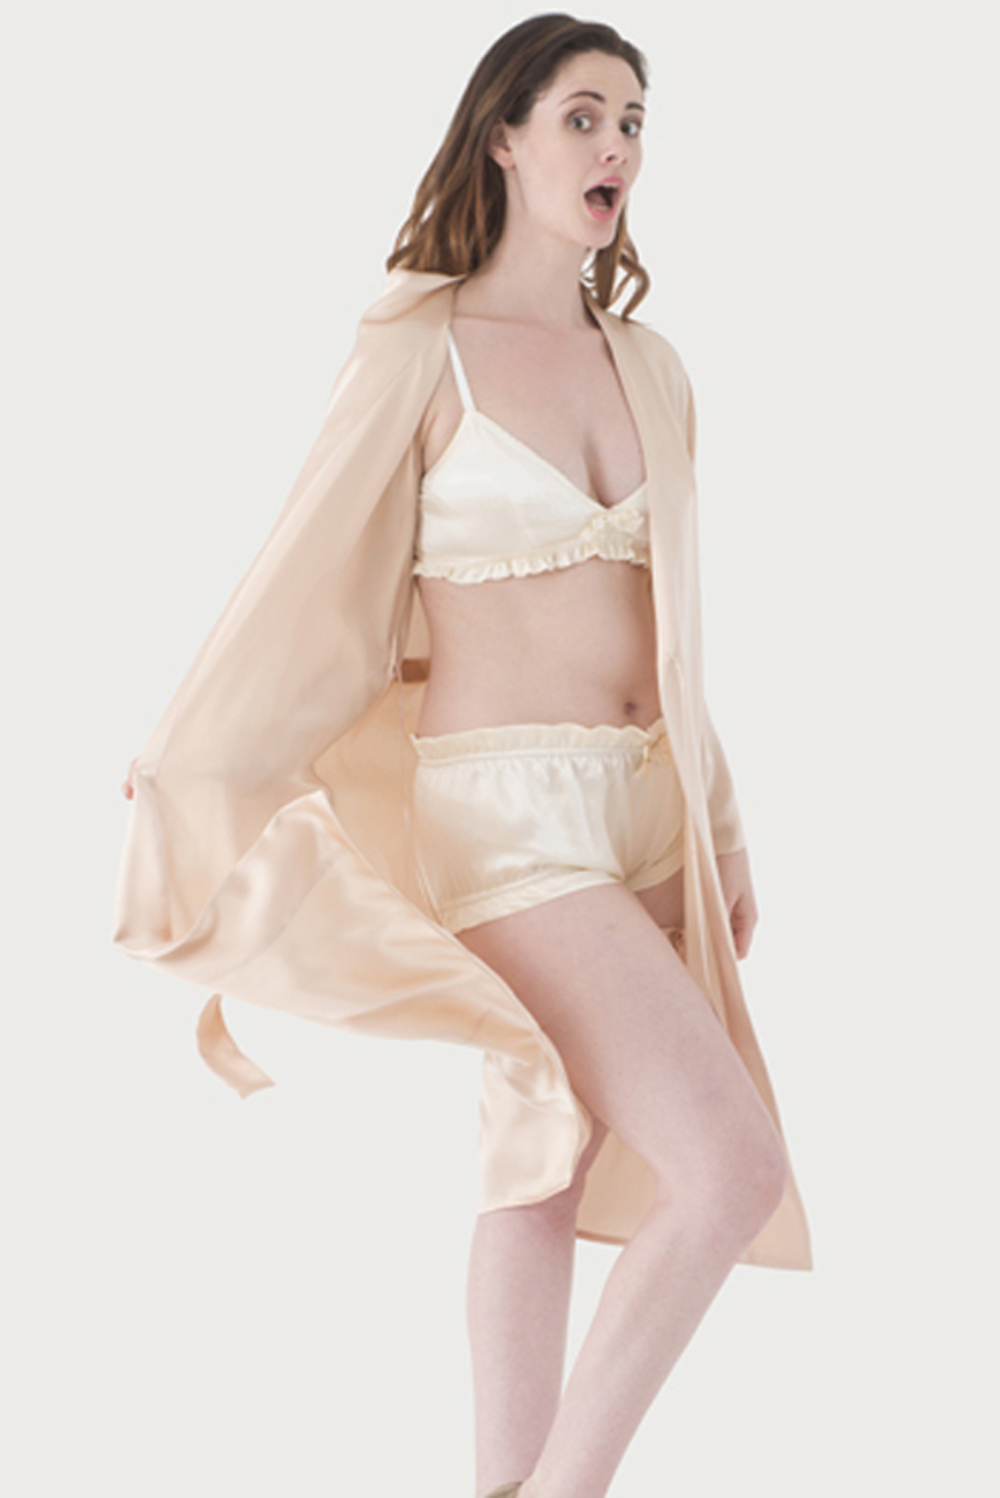 Silk French Knickers - The Little Wedding Company